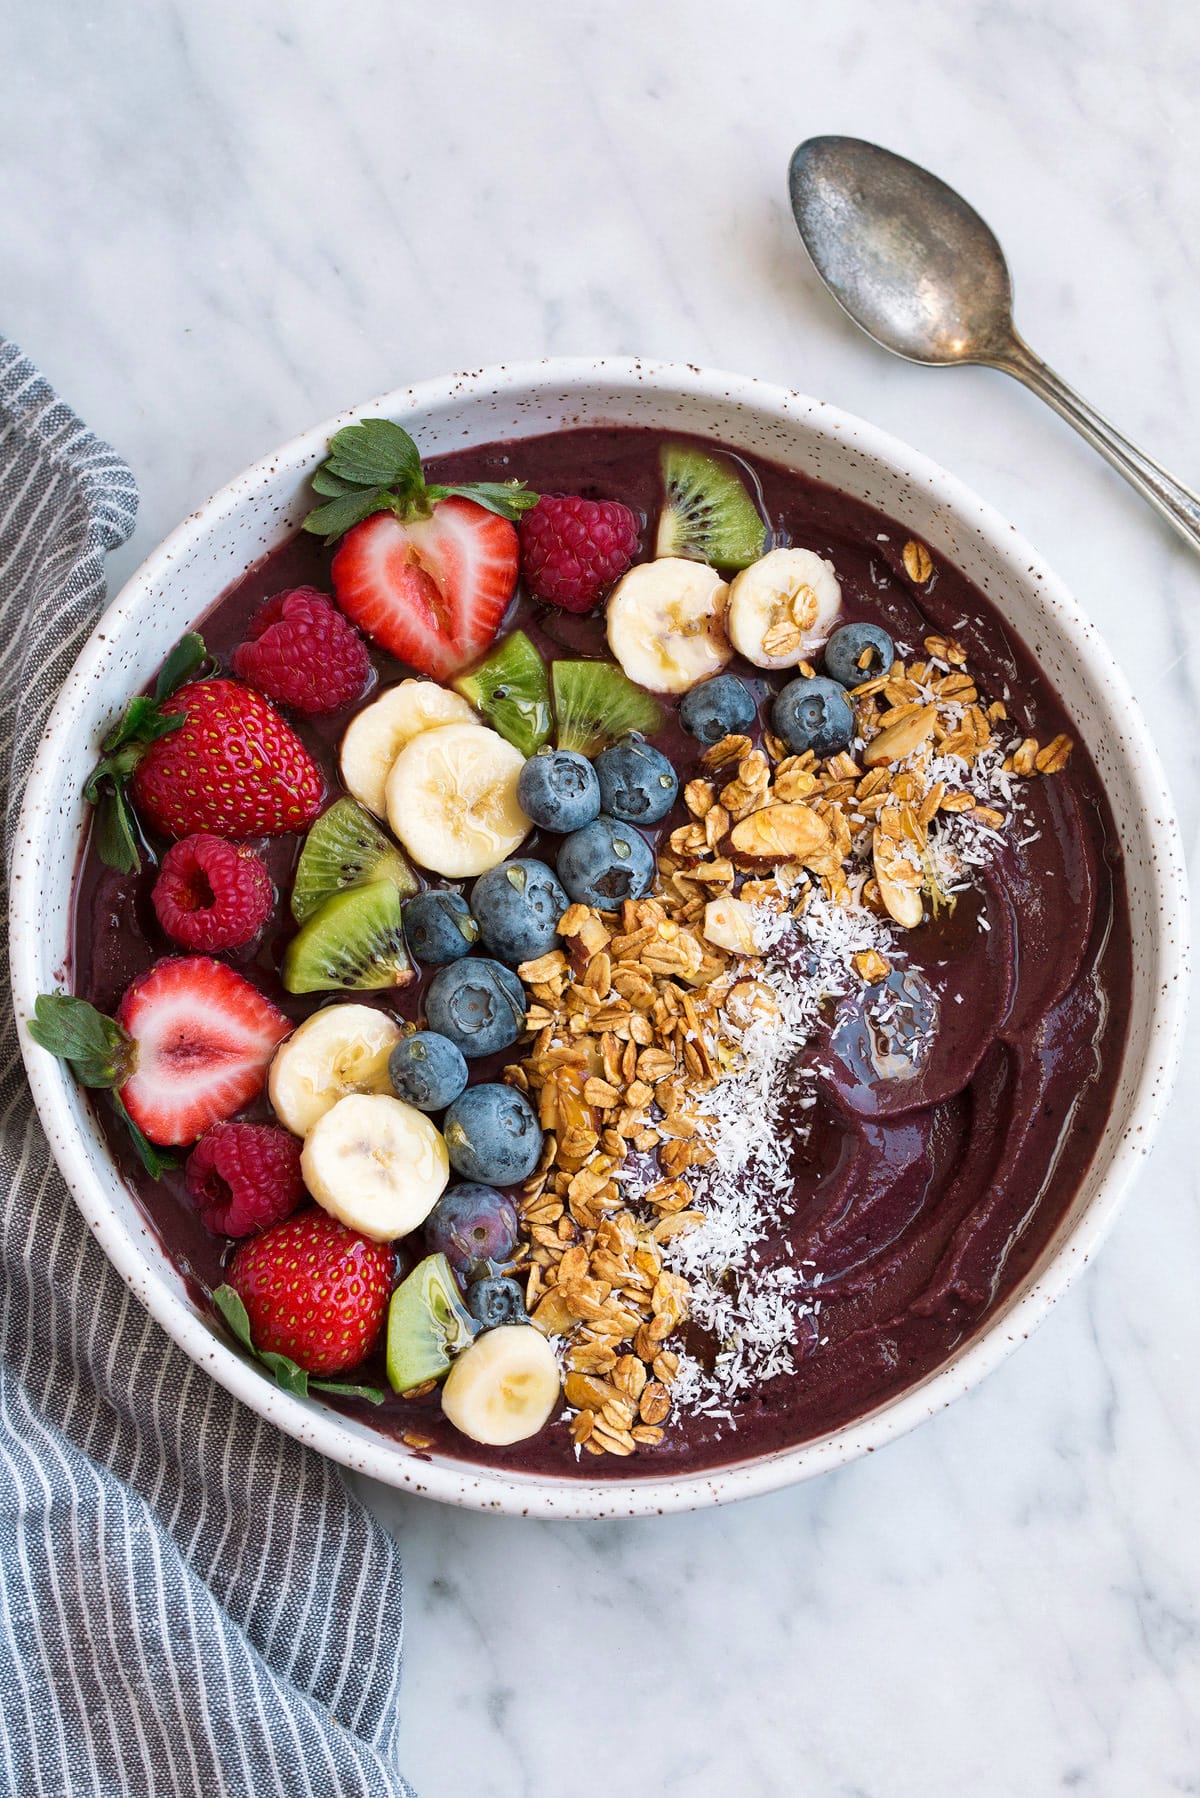 Acai Bowl topped with fresh fruit, granola and coconut in a large bowl.